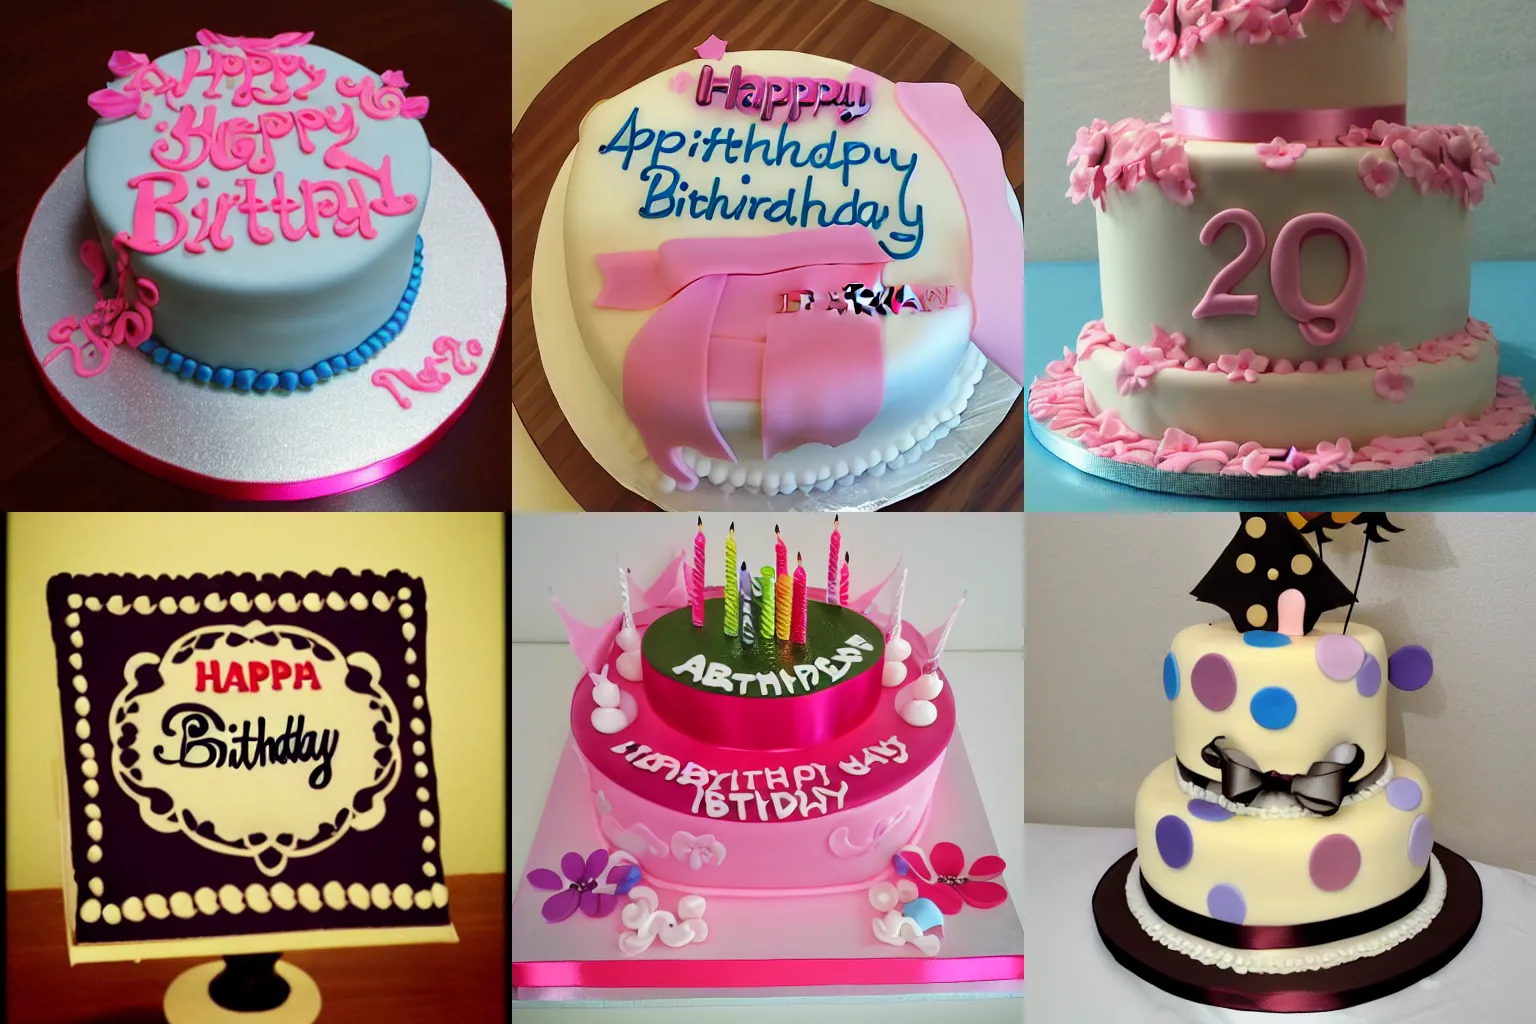 Prompt: a beautiful birthday cake sign for Lisa